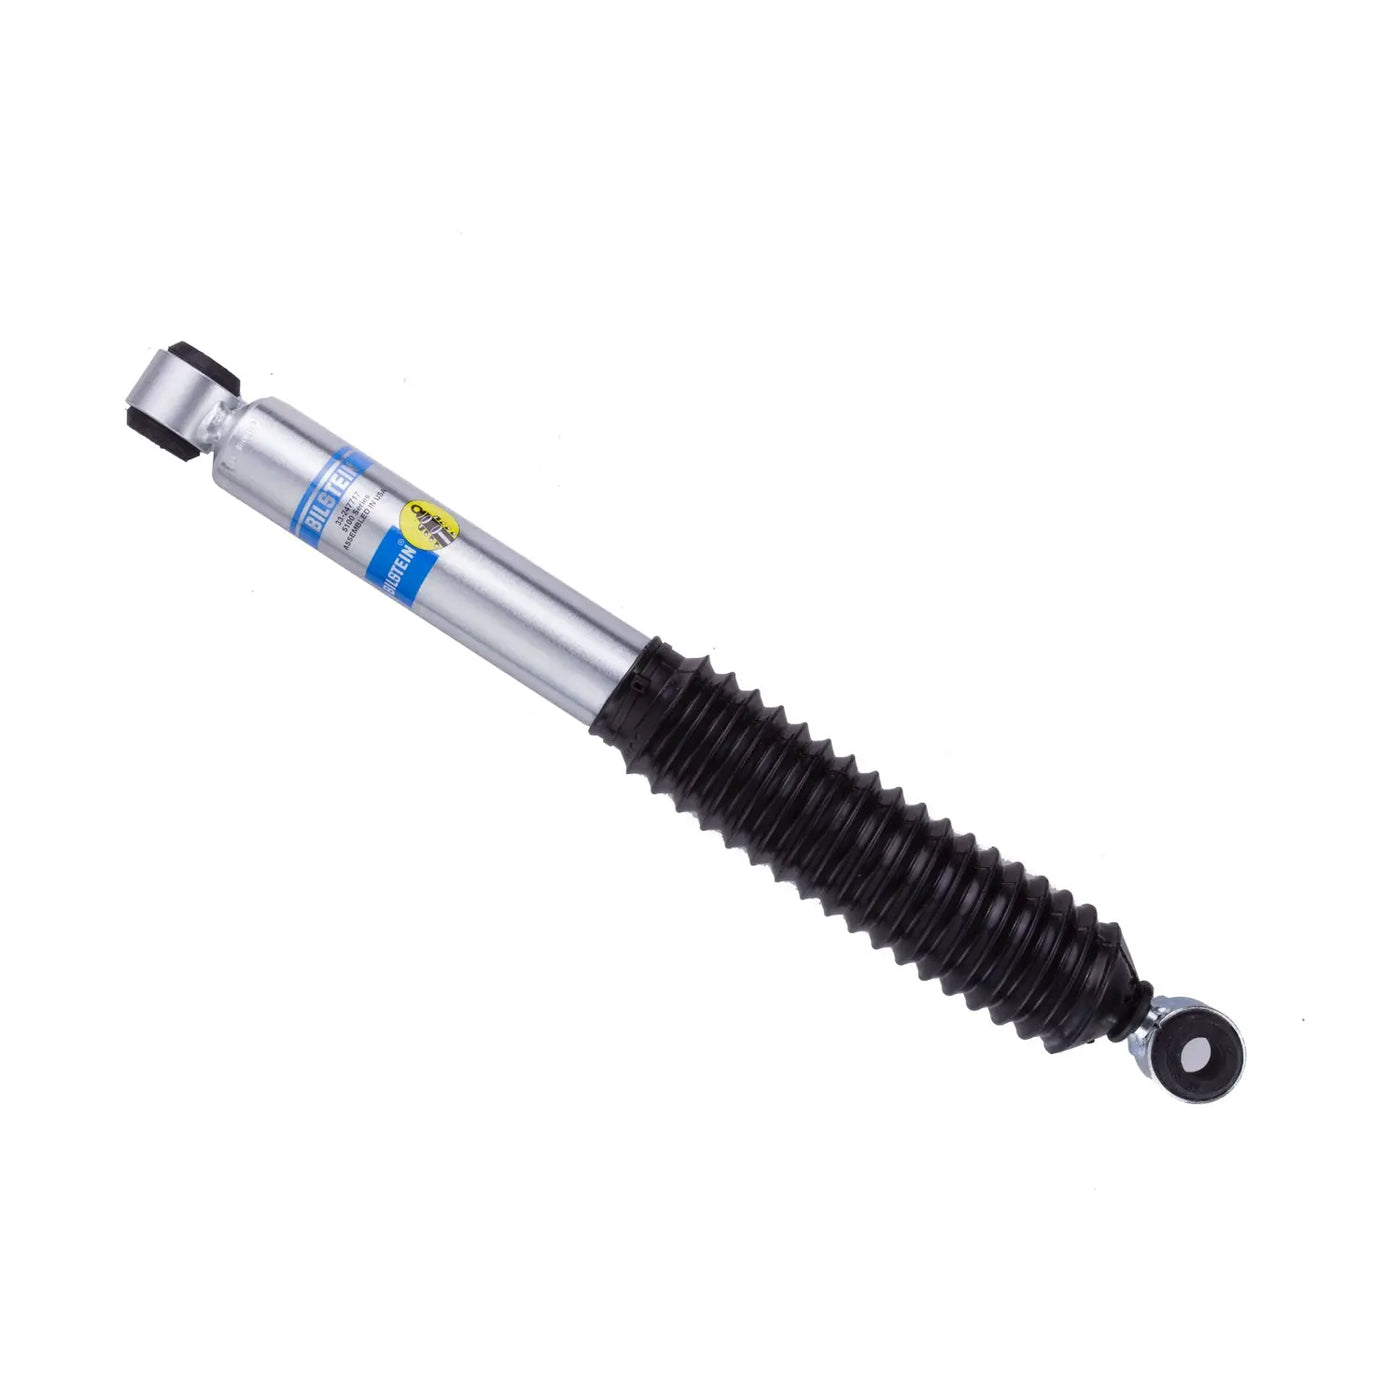 Bilstein 5100 Rear Shocks for Toyota Tacoma 1996-2004 (pair) - Wheel Every Weekend